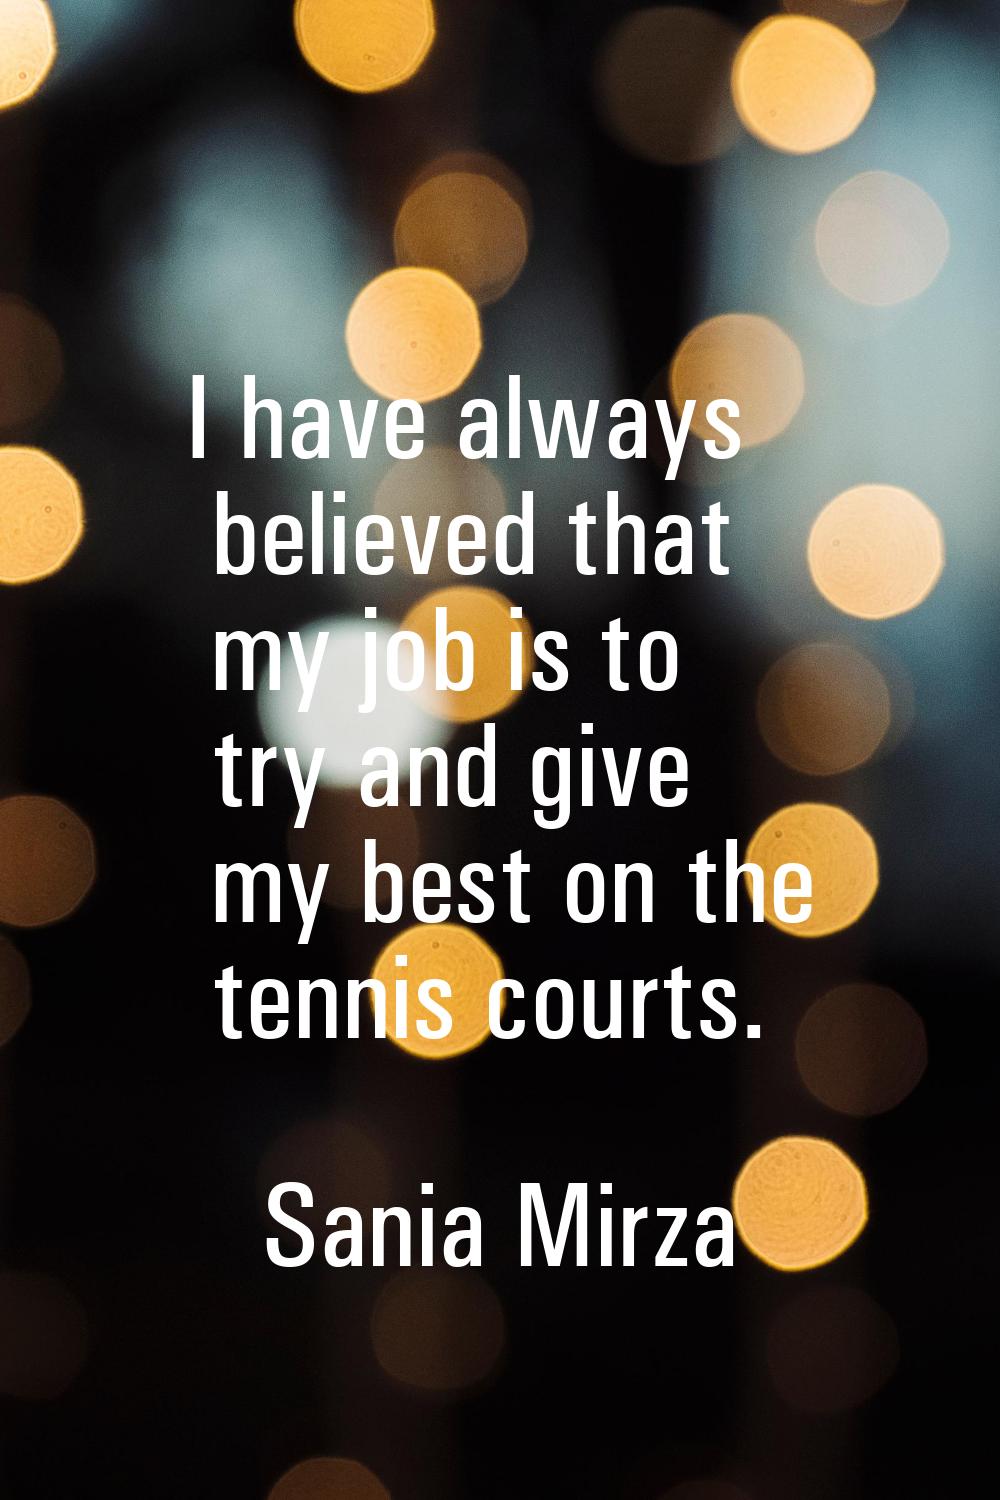 I have always believed that my job is to try and give my best on the tennis courts.